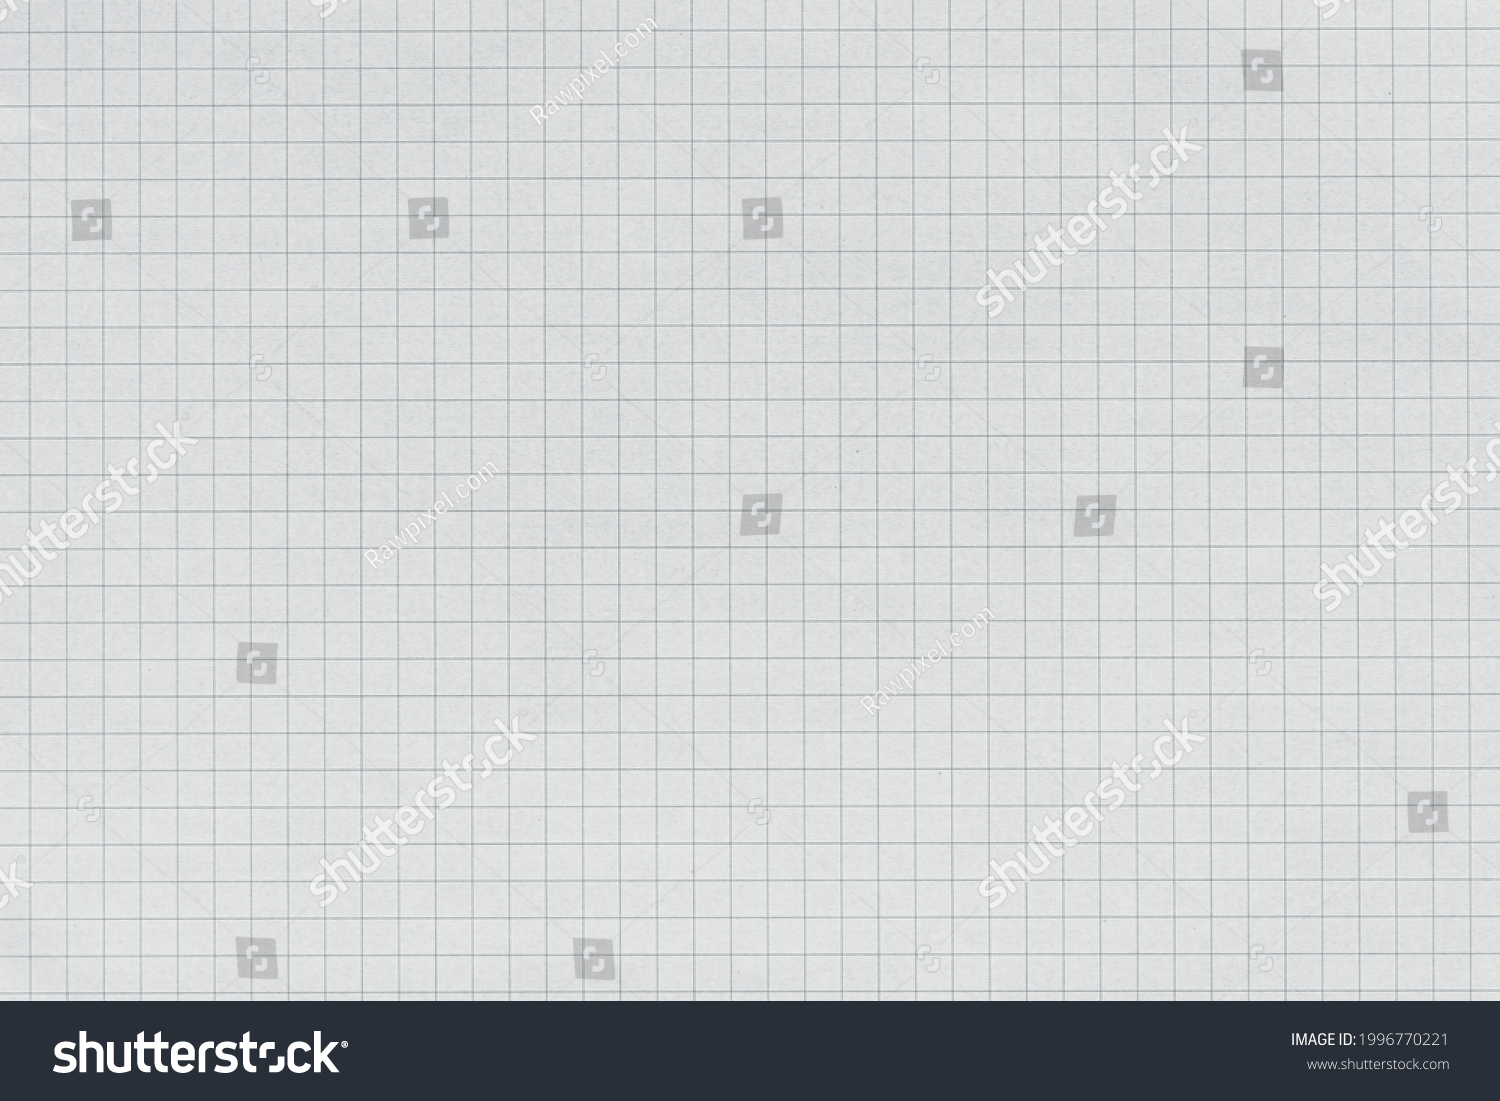 Grid patterned paper texture background #1996770221